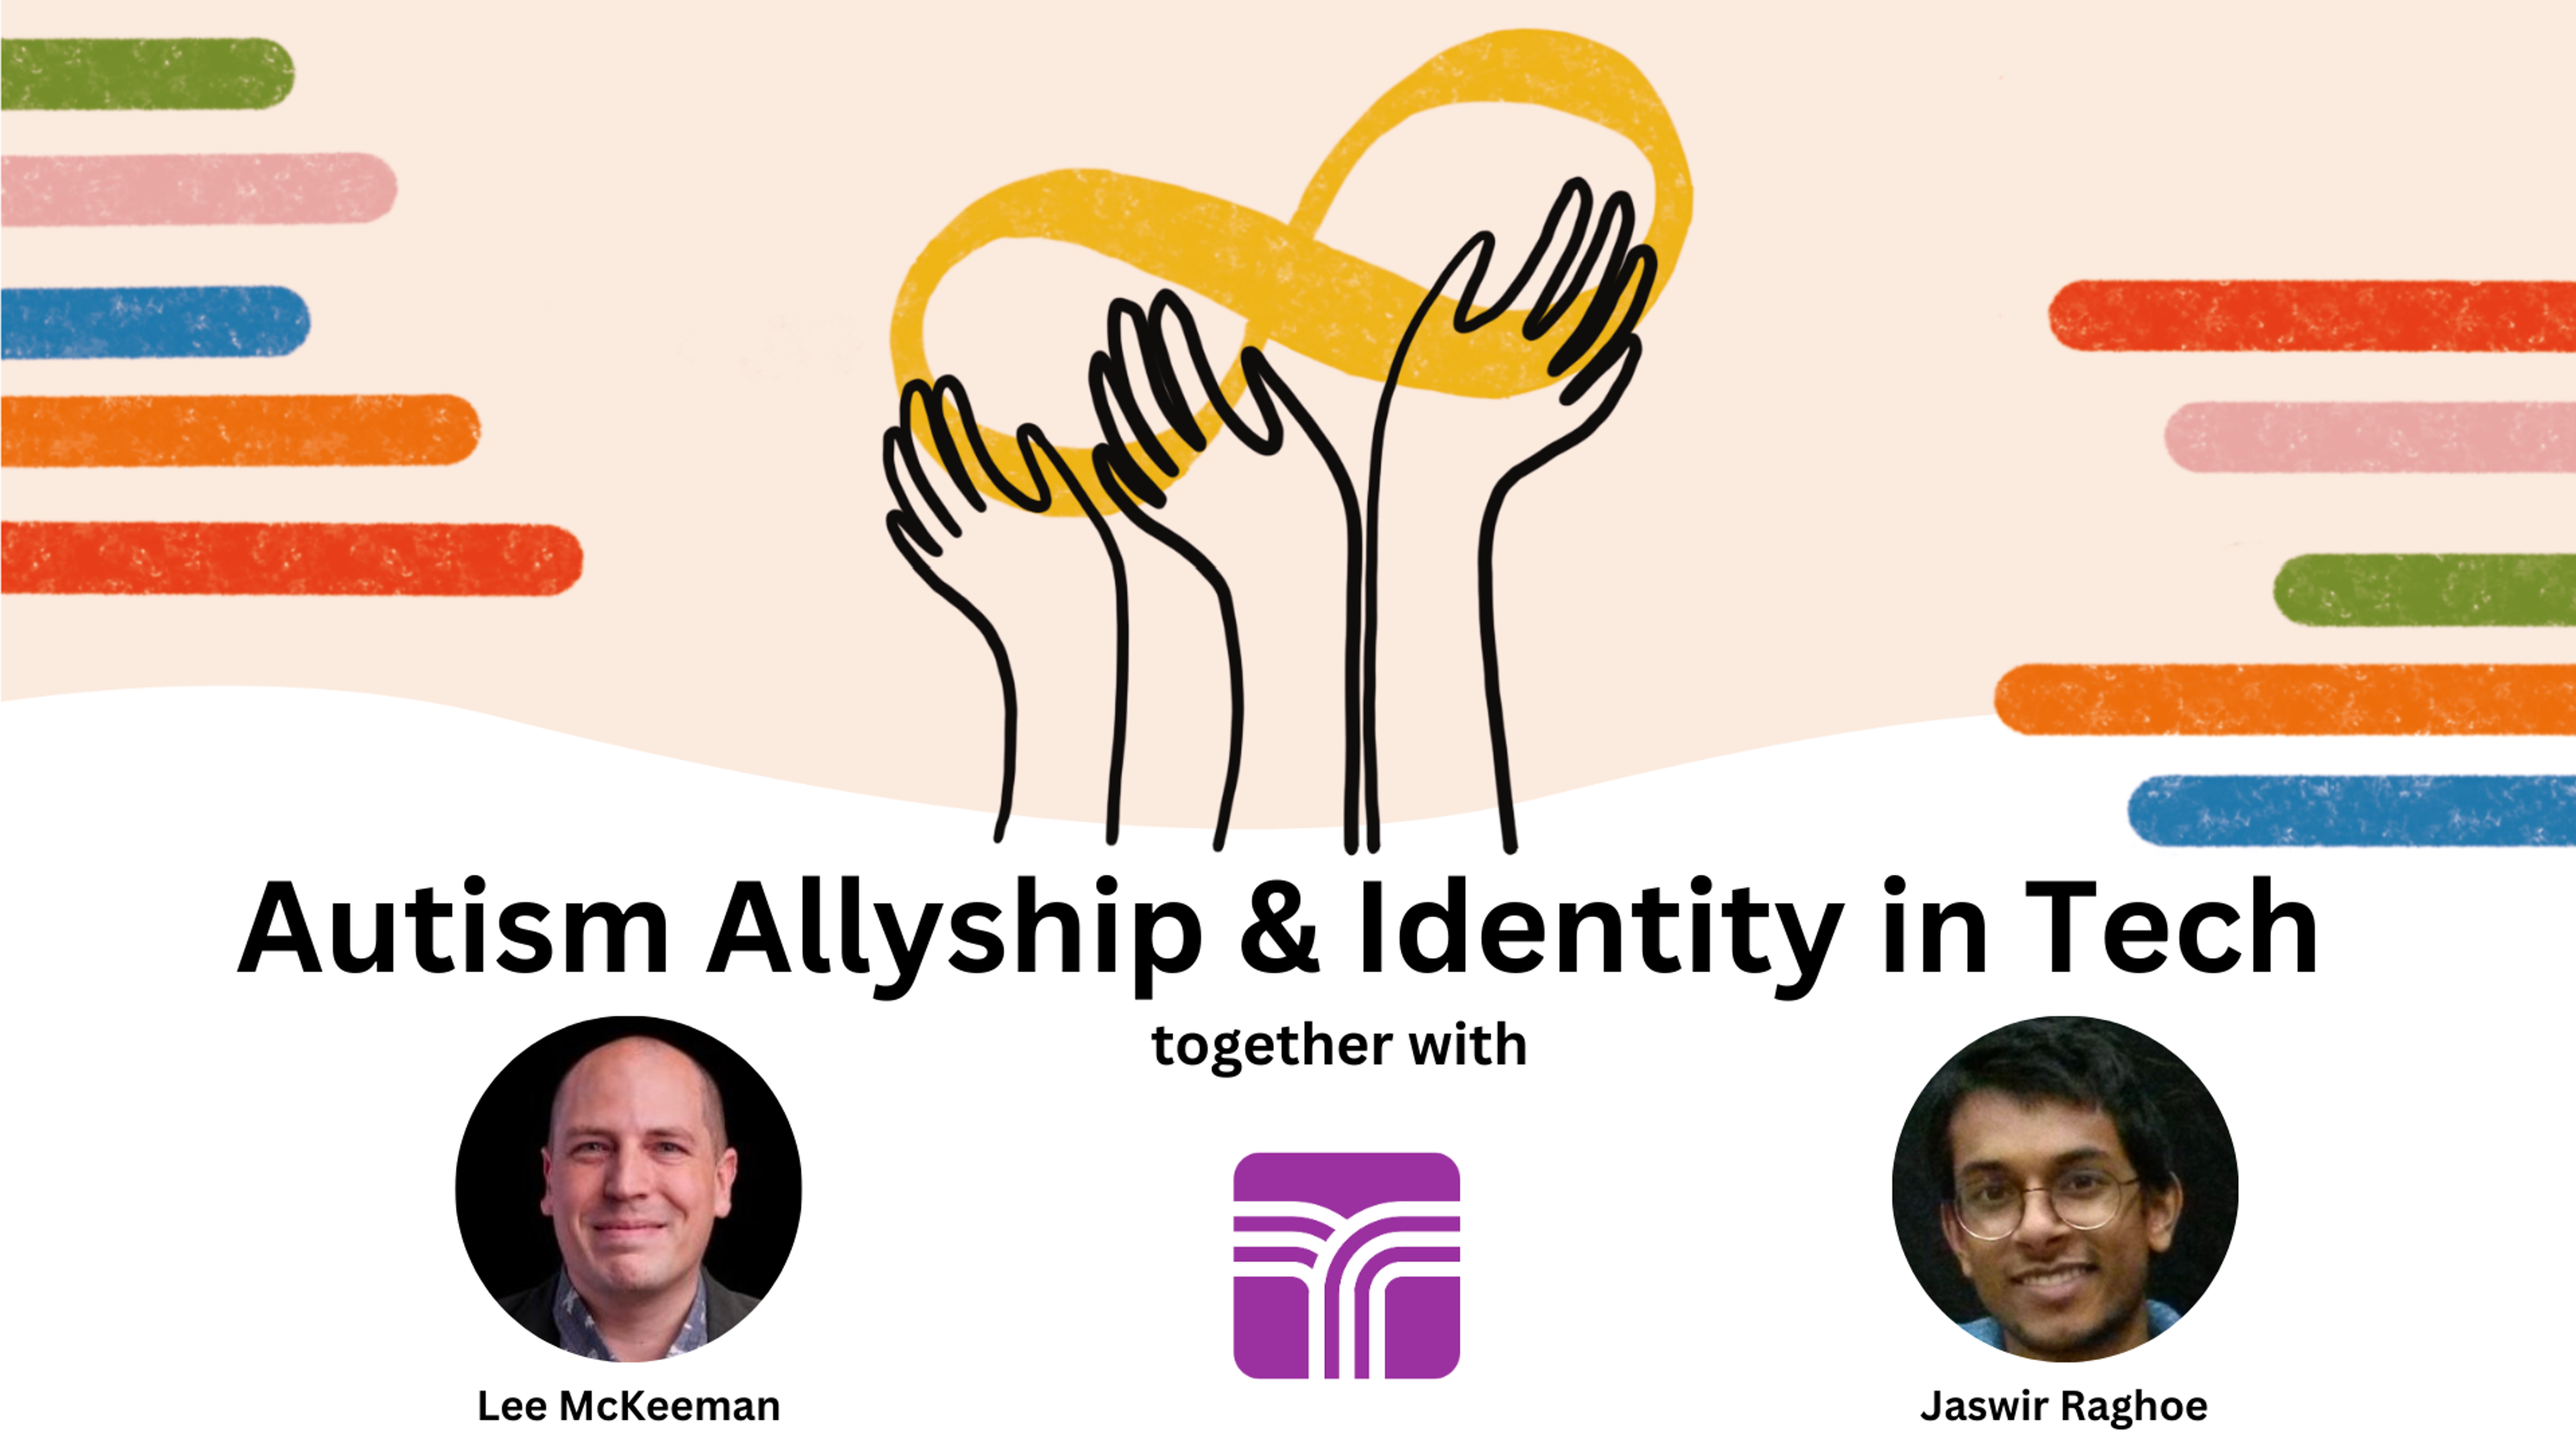 Autism Allyship and Identity in Tech event